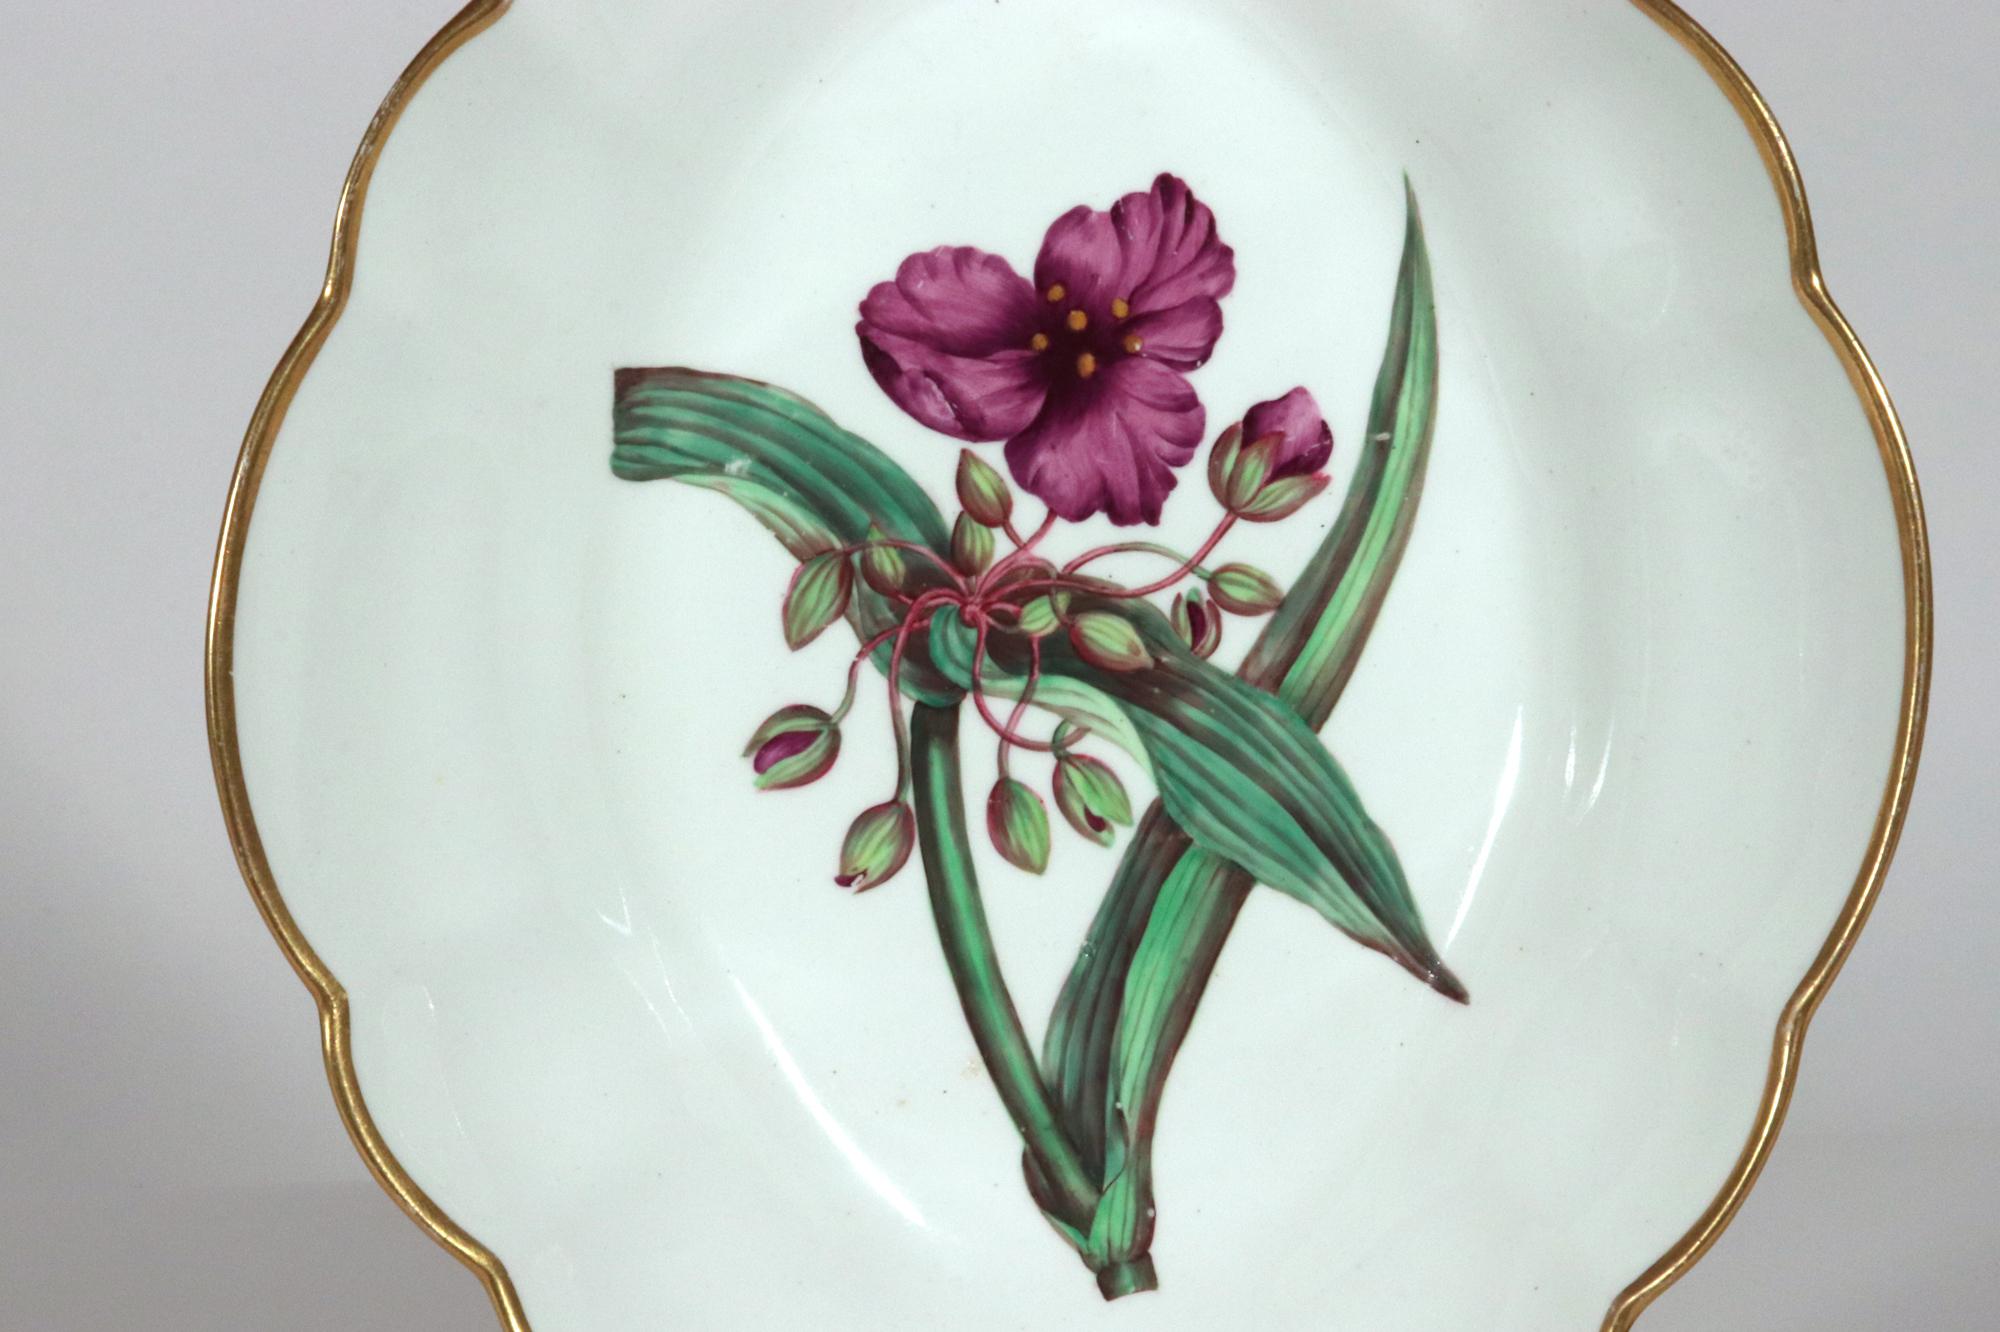 Spode Porcelain Botanical Specimen Dish,
Spiderwort,
Circa 1810-20

The botanical is after William Curtis's The Botanical Magazine illustrated by James Sowerby.

The Spode porcelain dish is of an deep oval form and was part of a dessert service.